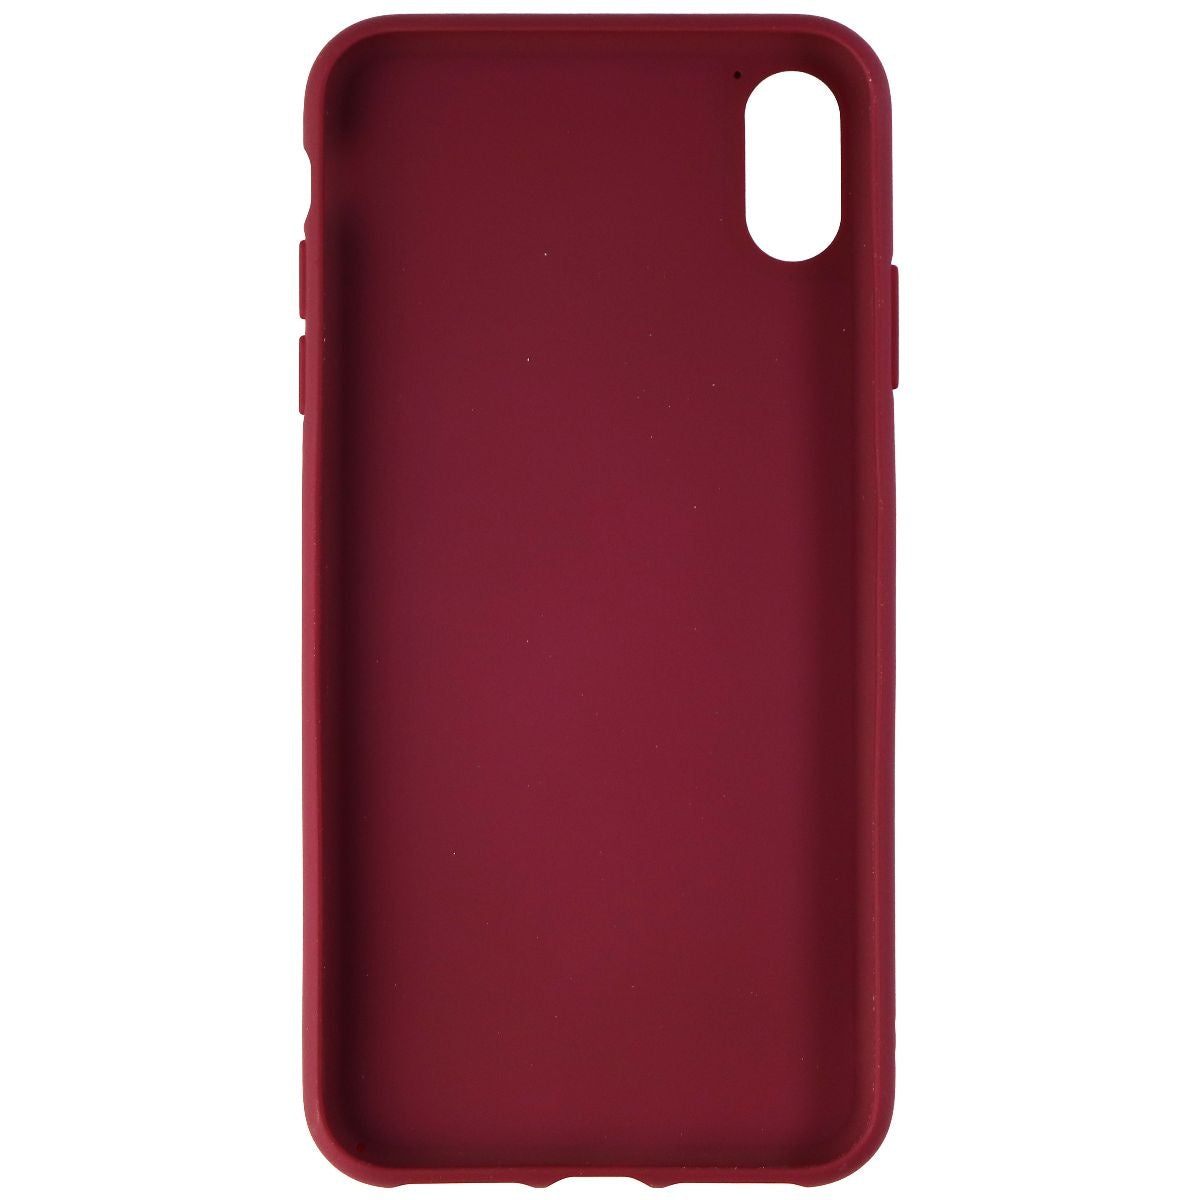 Adidas 3-Stripes Snap Case for Apple iPhone Xs Max - Burgundy Cell Phone - Cases, Covers & Skins Adidas    - Simple Cell Bulk Wholesale Pricing - USA Seller